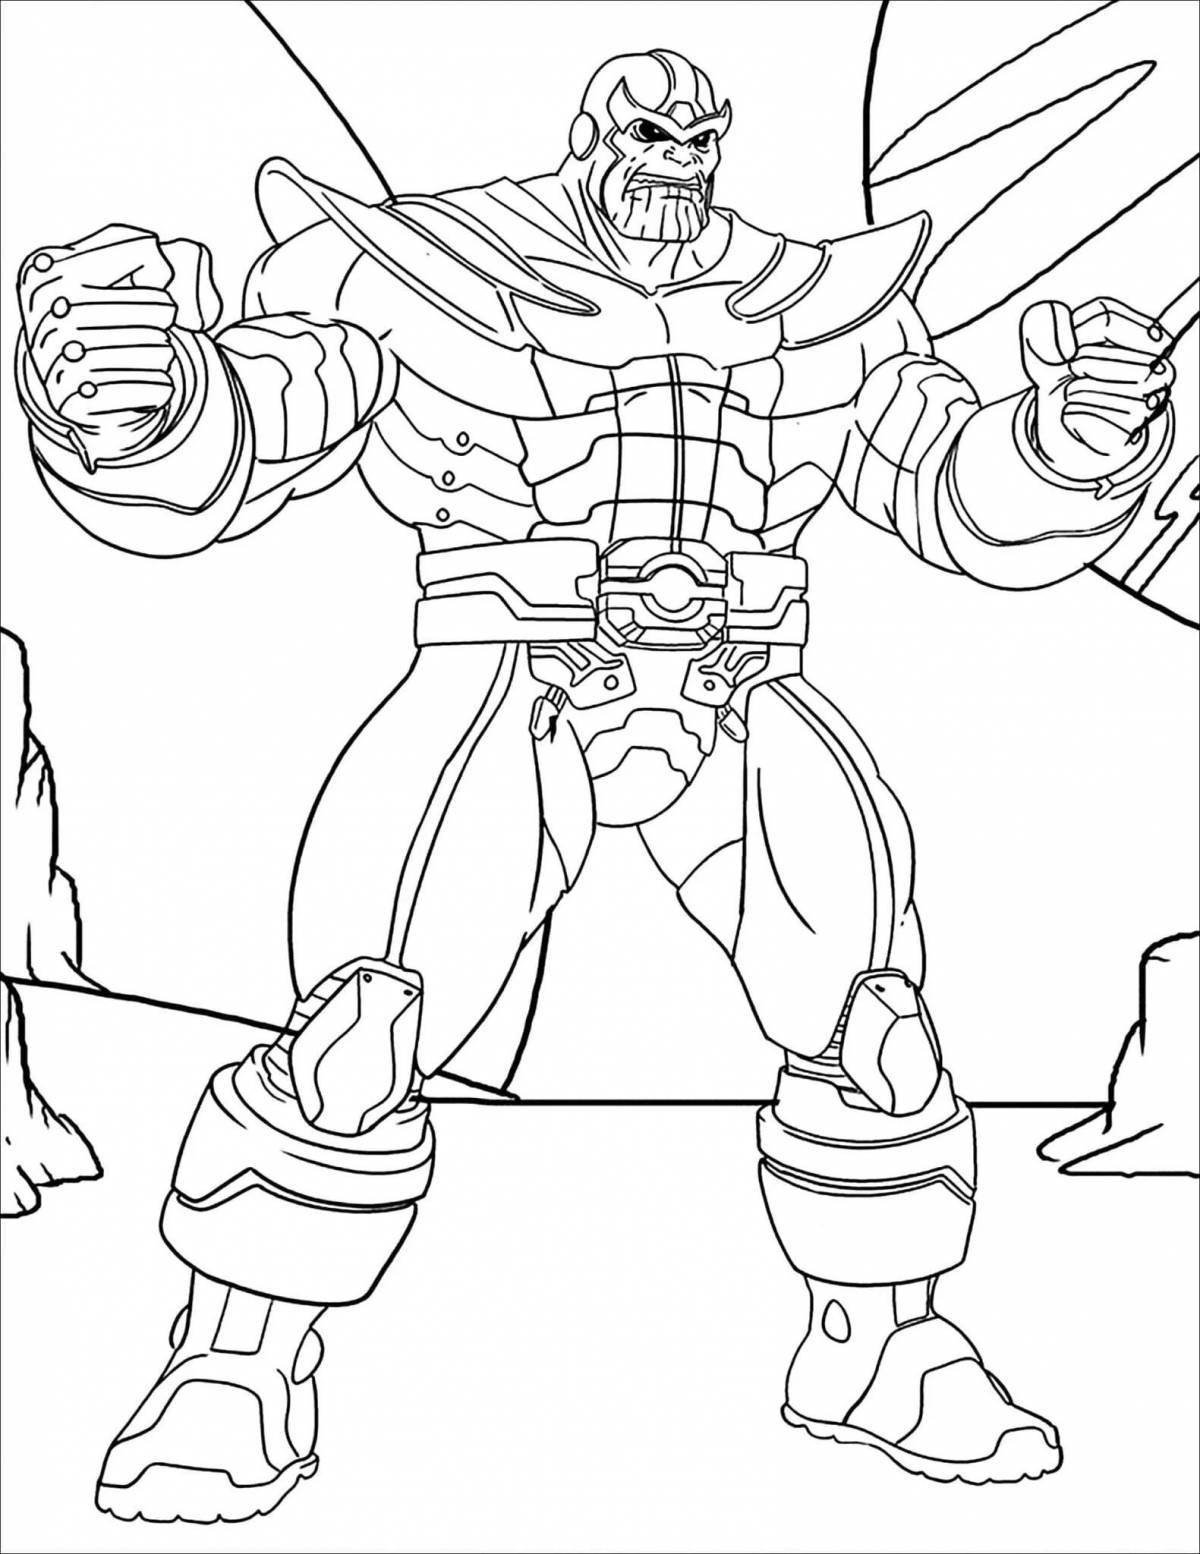 Great marvel villains coloring book